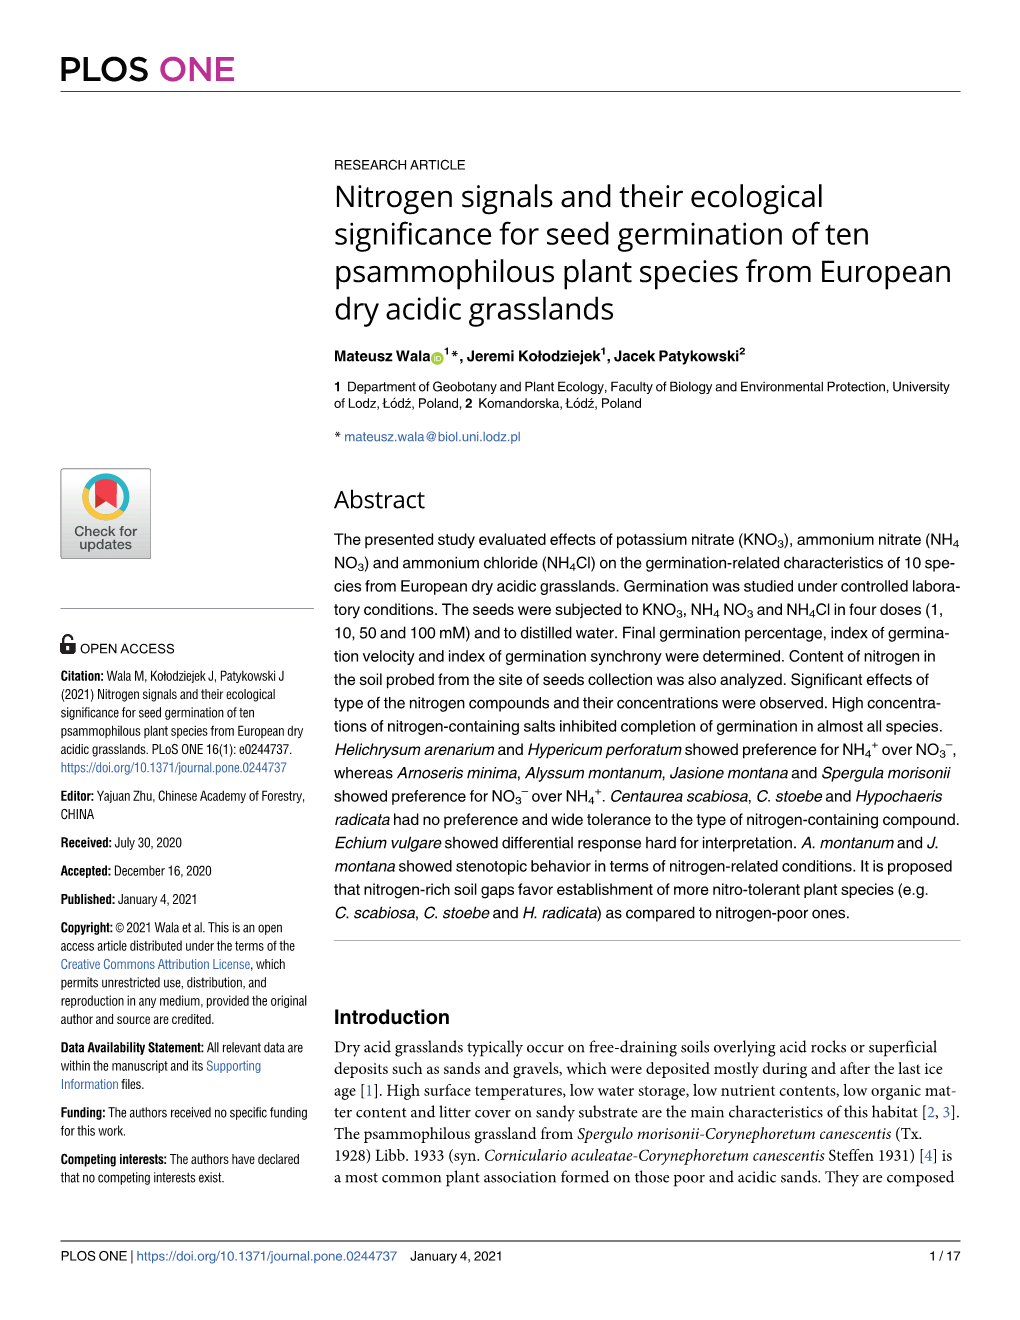 Nitrogen Signals and Their Ecological Significance for Seed Germination of Ten Psammophilous Plant Species from European Dry Acidic Grasslands